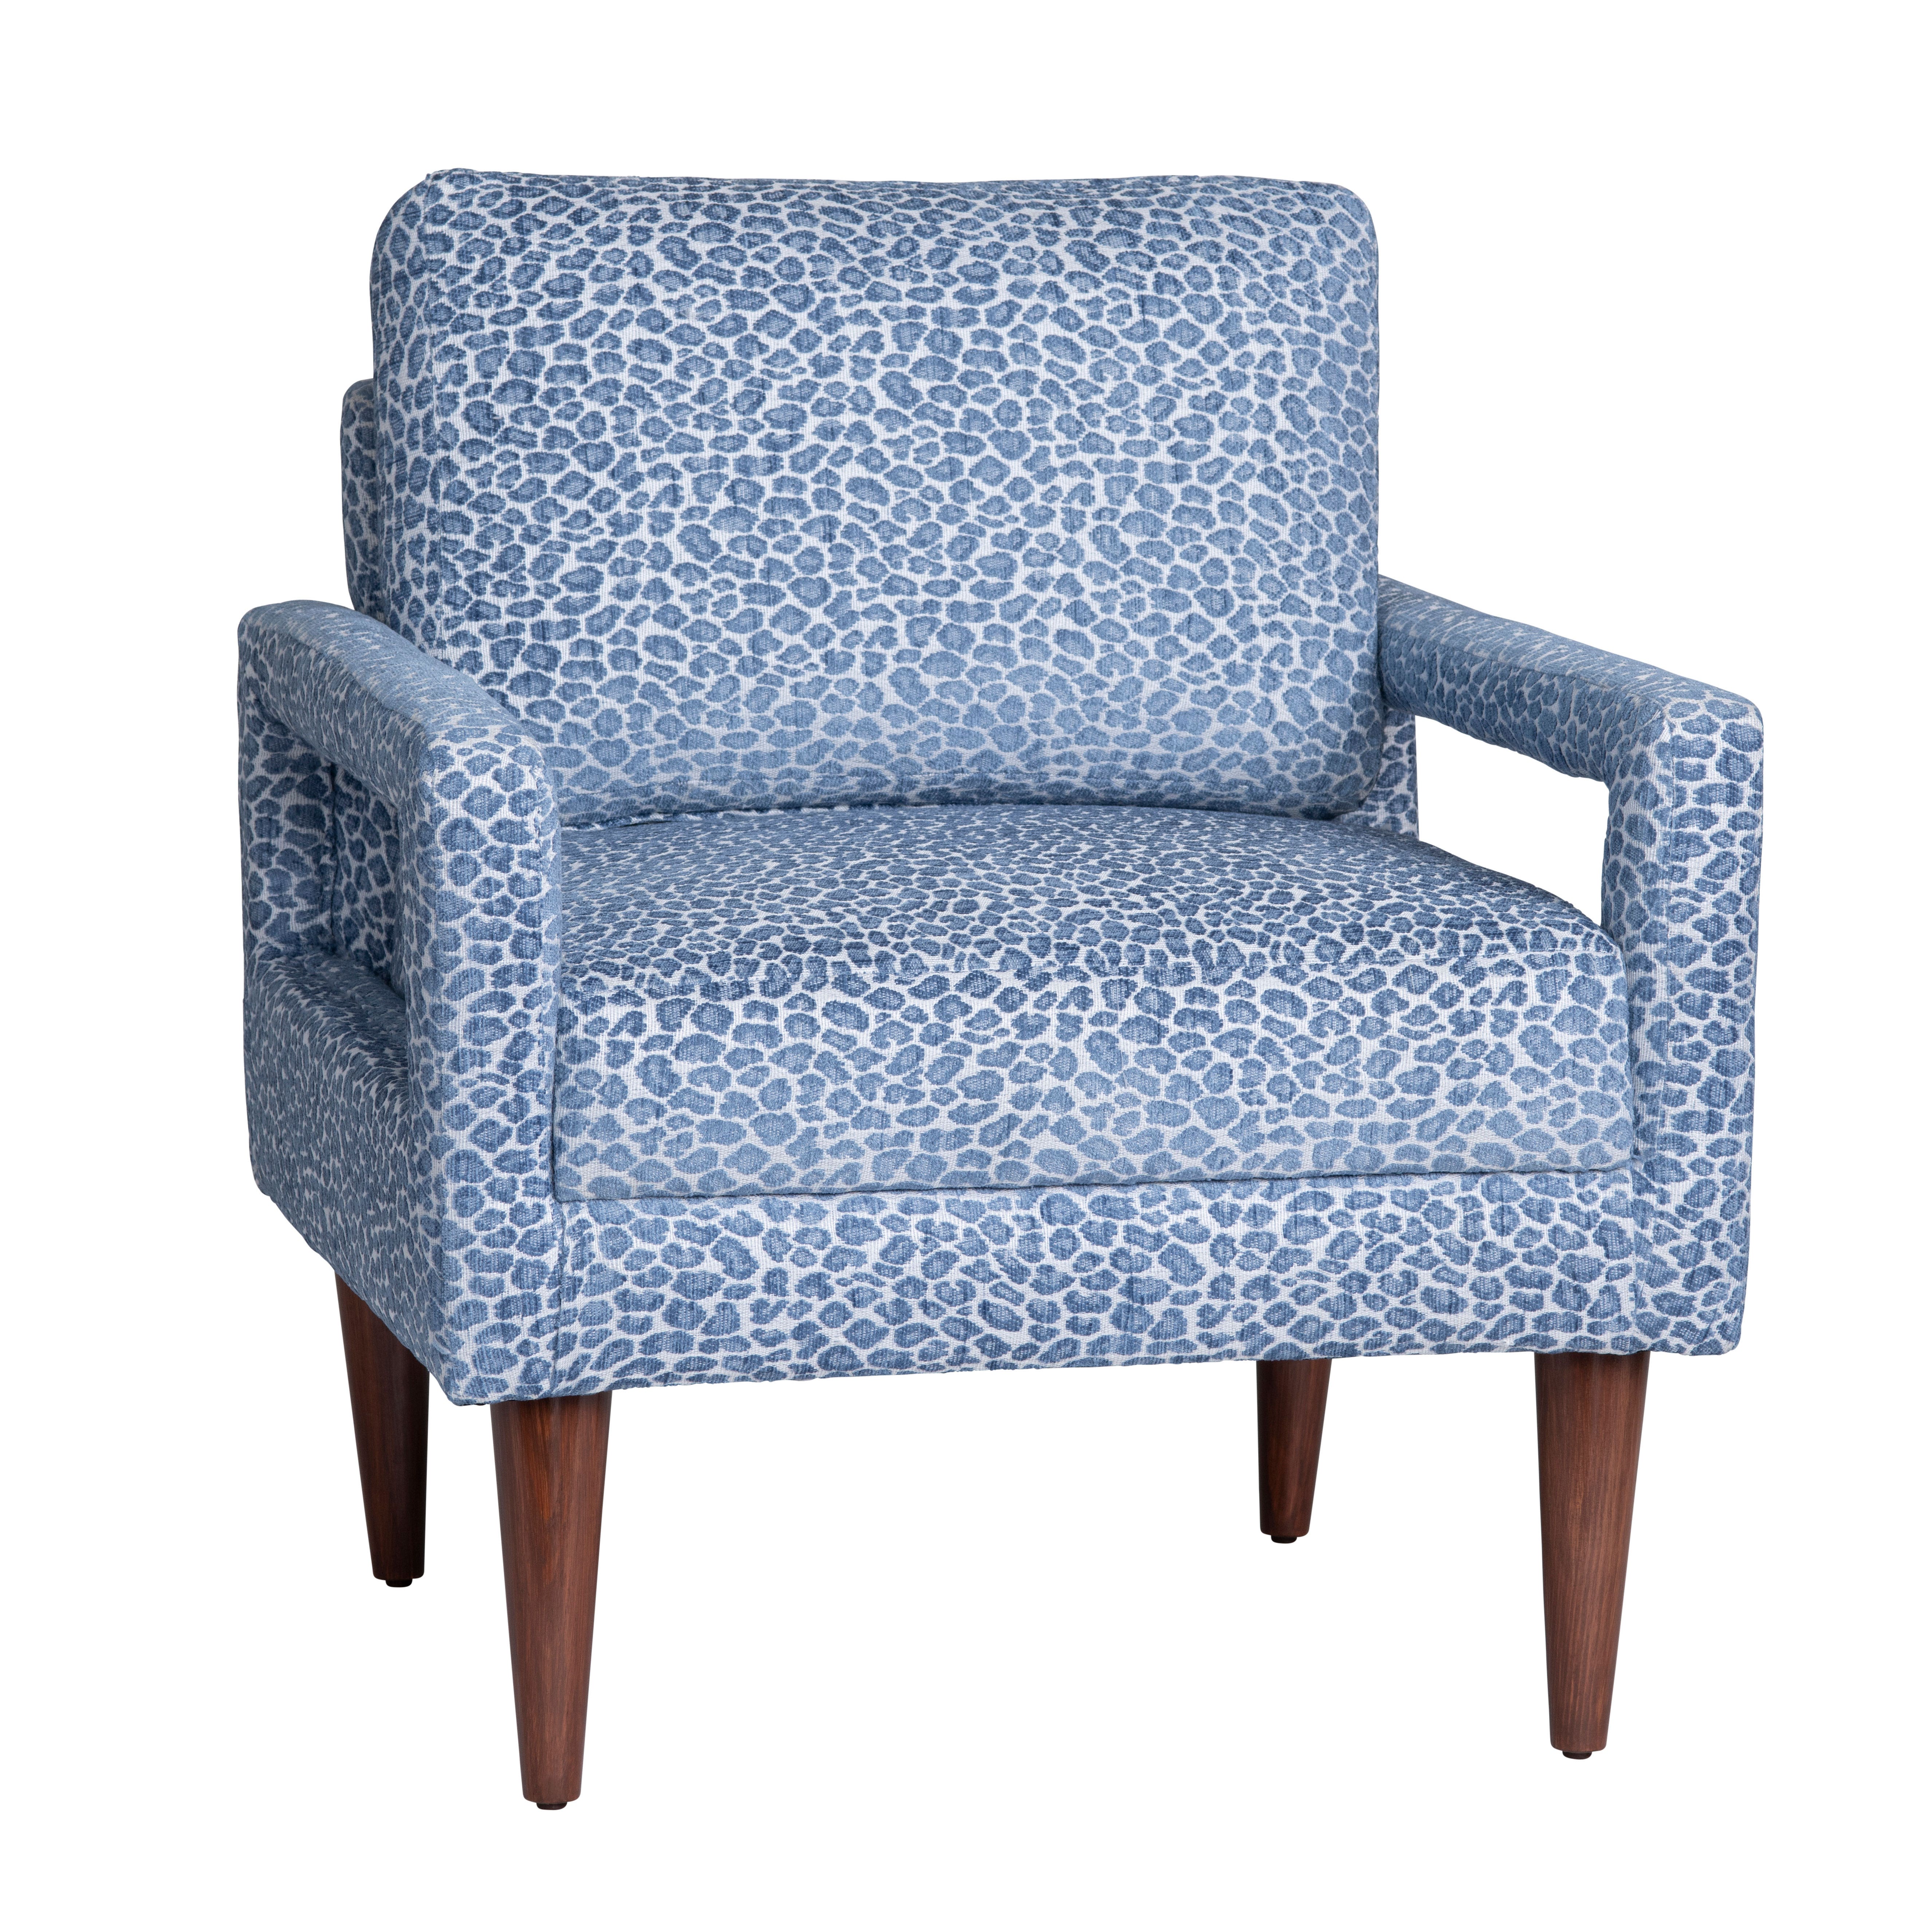 Olaf Accent Chair - Crestview Collection